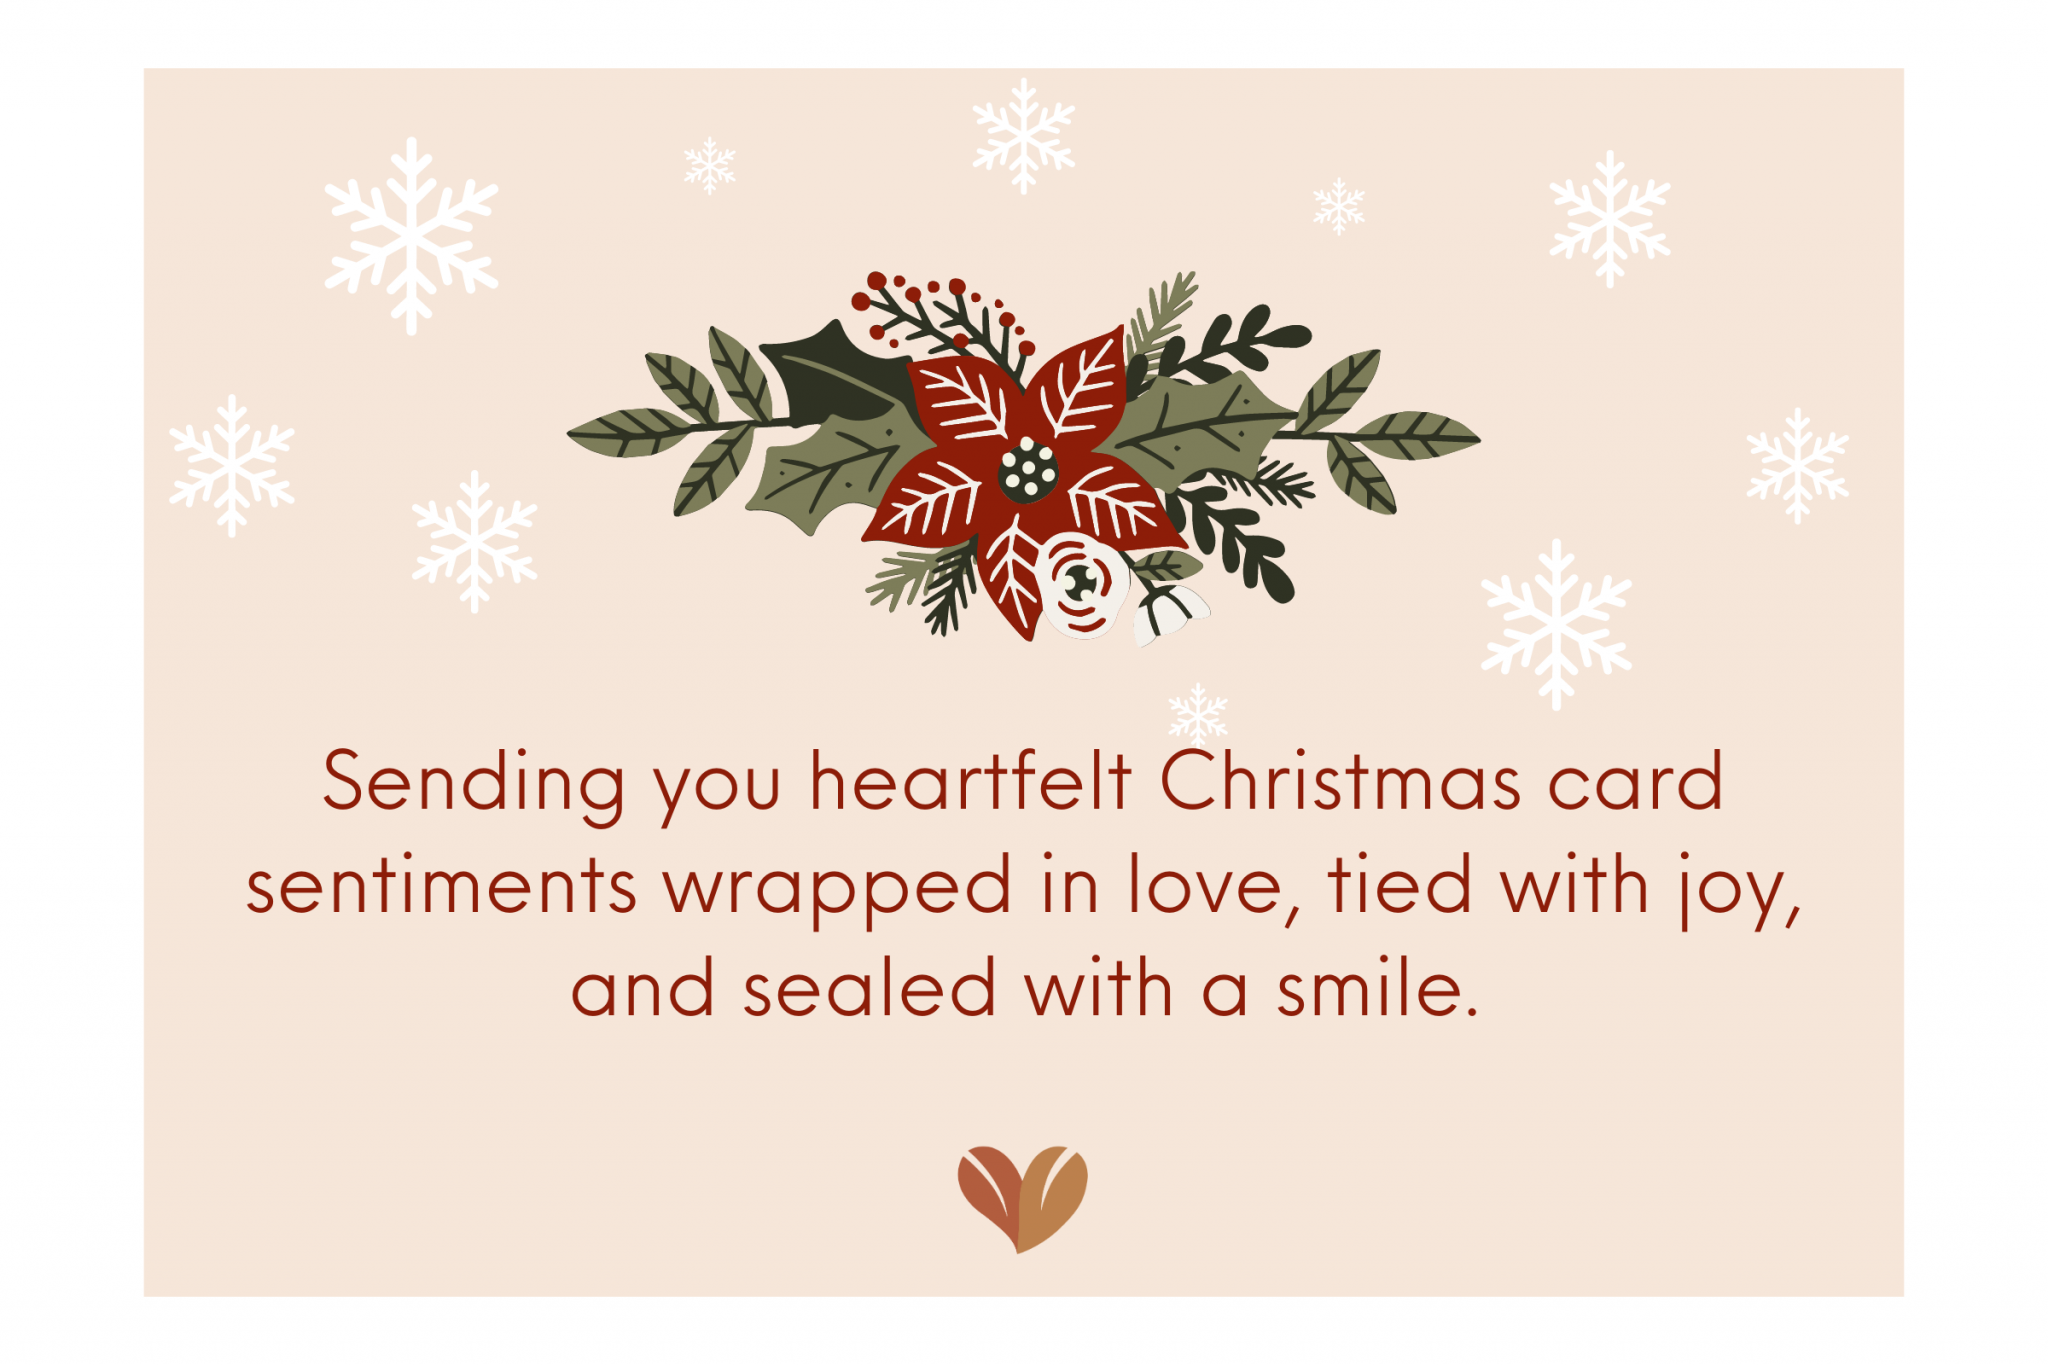 110-christmas-card-sentiments-thoughtful-ways-to-spread-joy-my